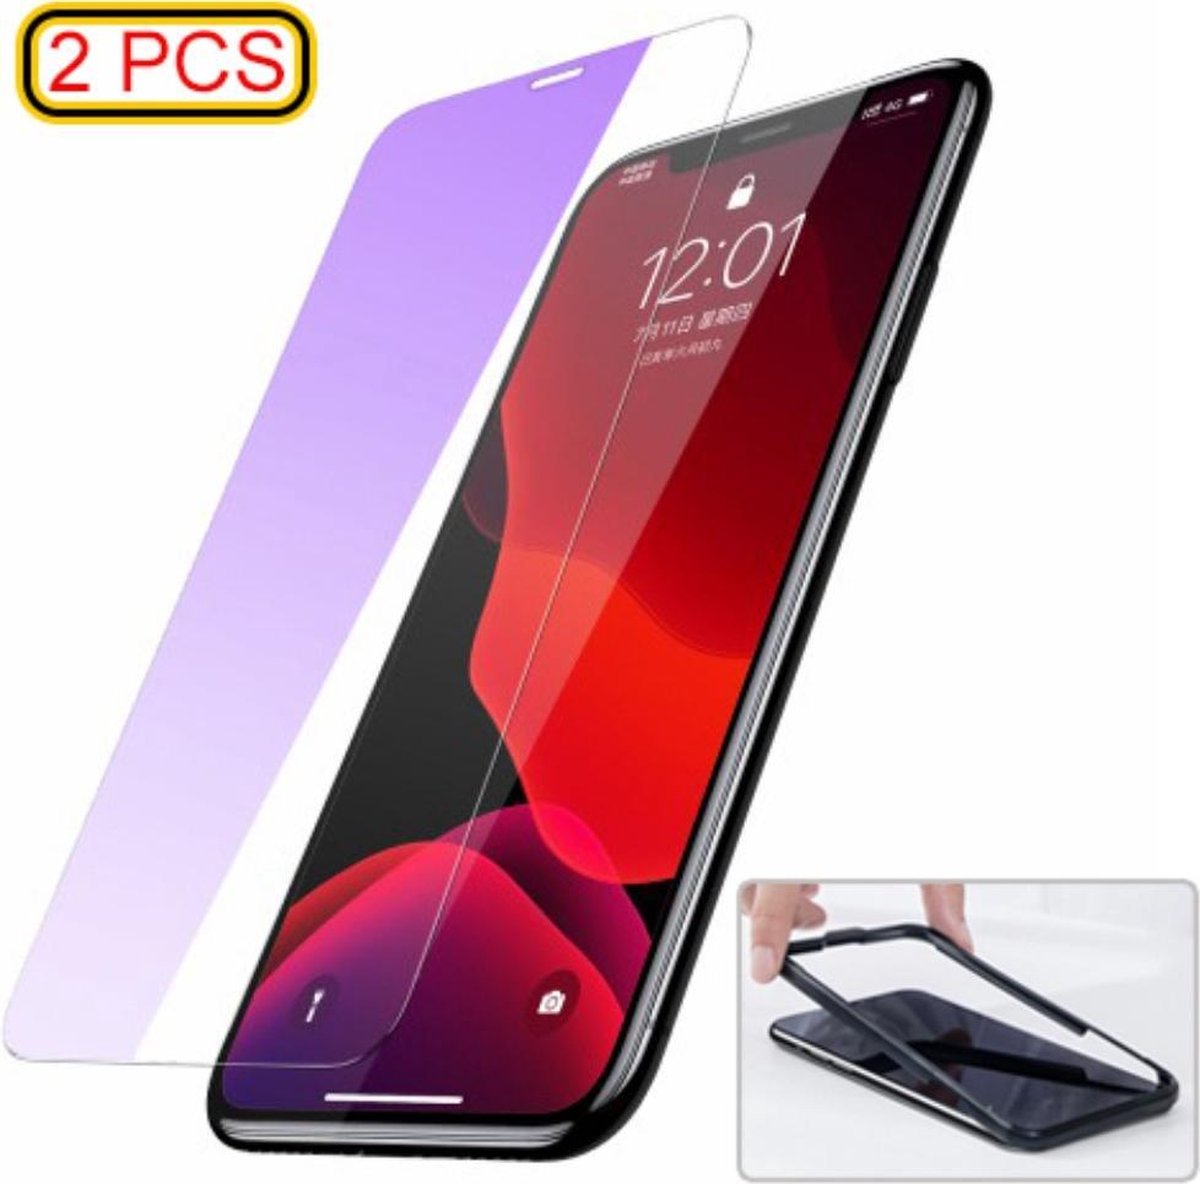 0.3mm Anti-blue-ray Tempered Glass Screen Protector voor iPhone XR / iPhone 11 (2 stuks) - Baseus